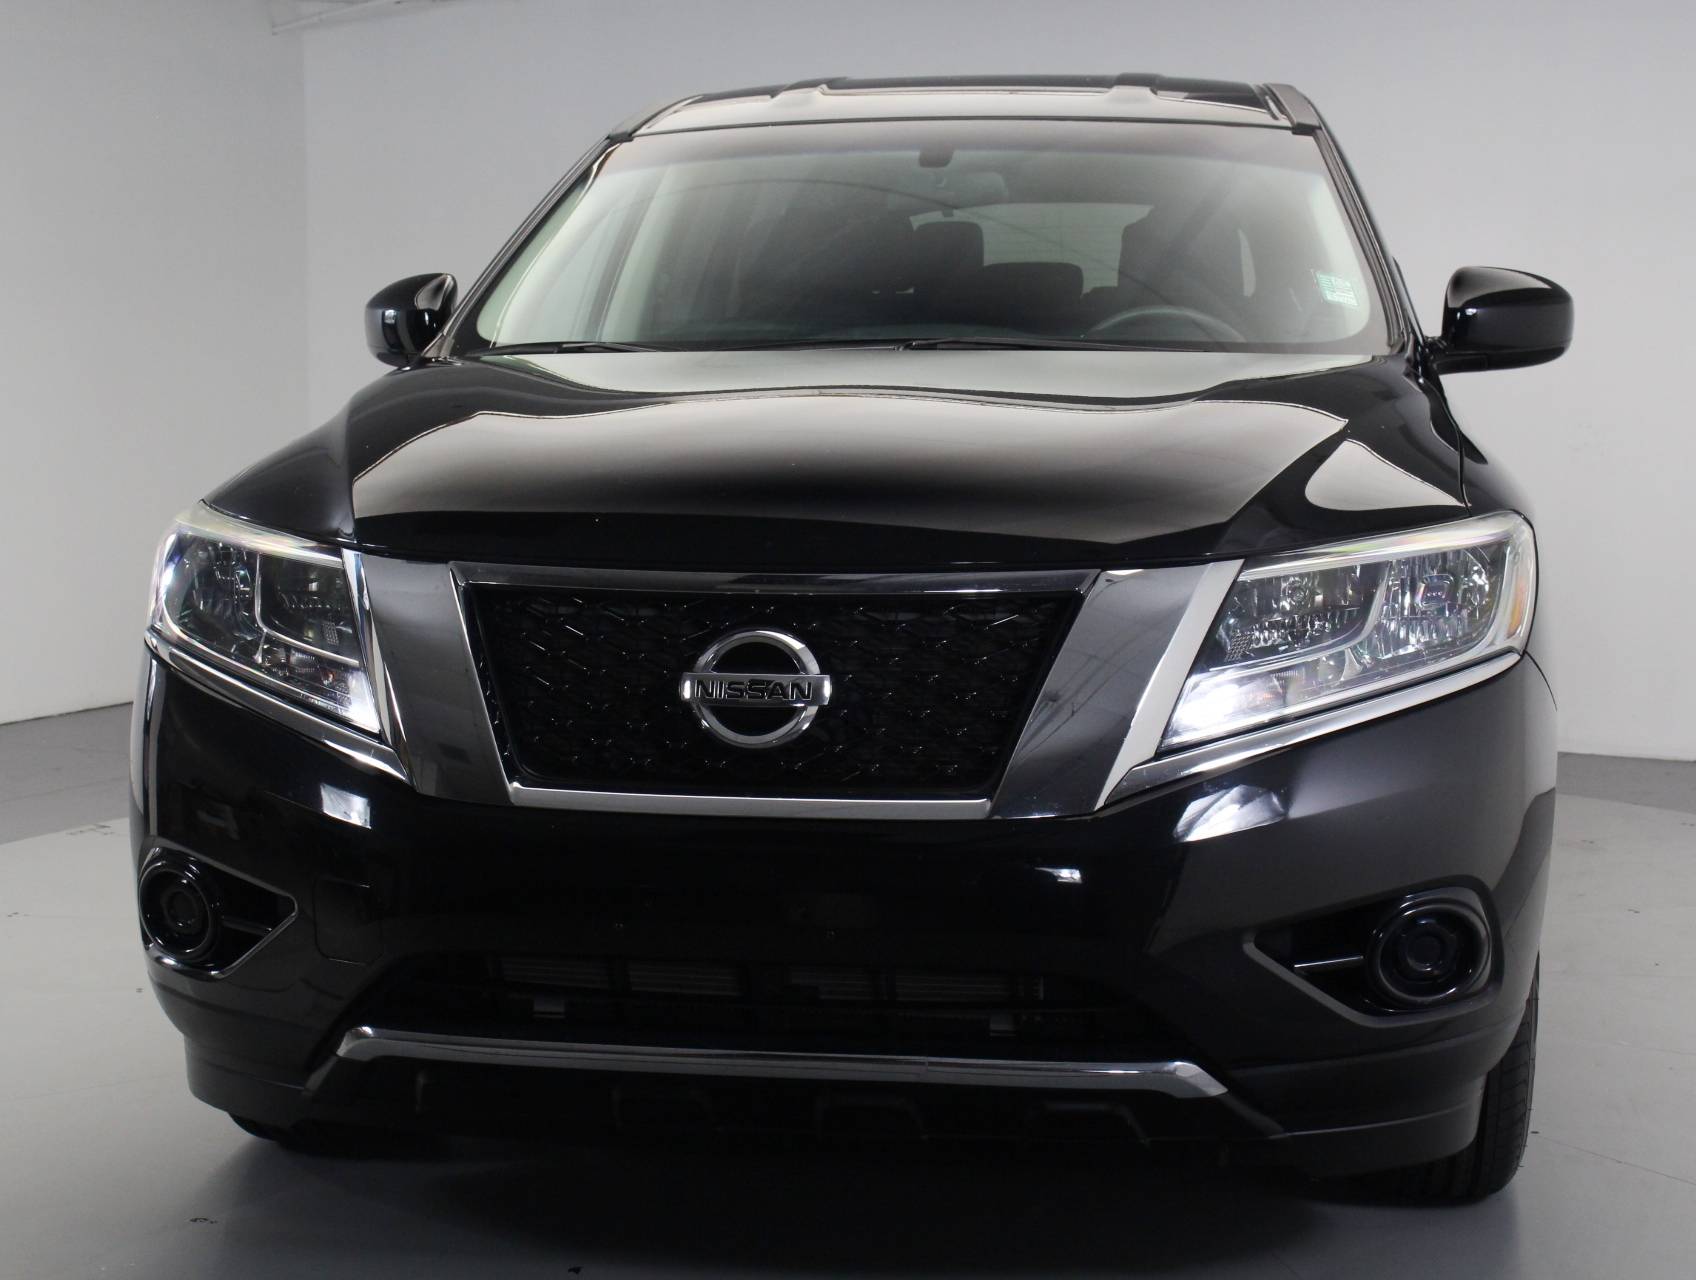 Florida Fine Cars - Used NISSAN PATHFINDER 2013 WEST PALM 4wd S